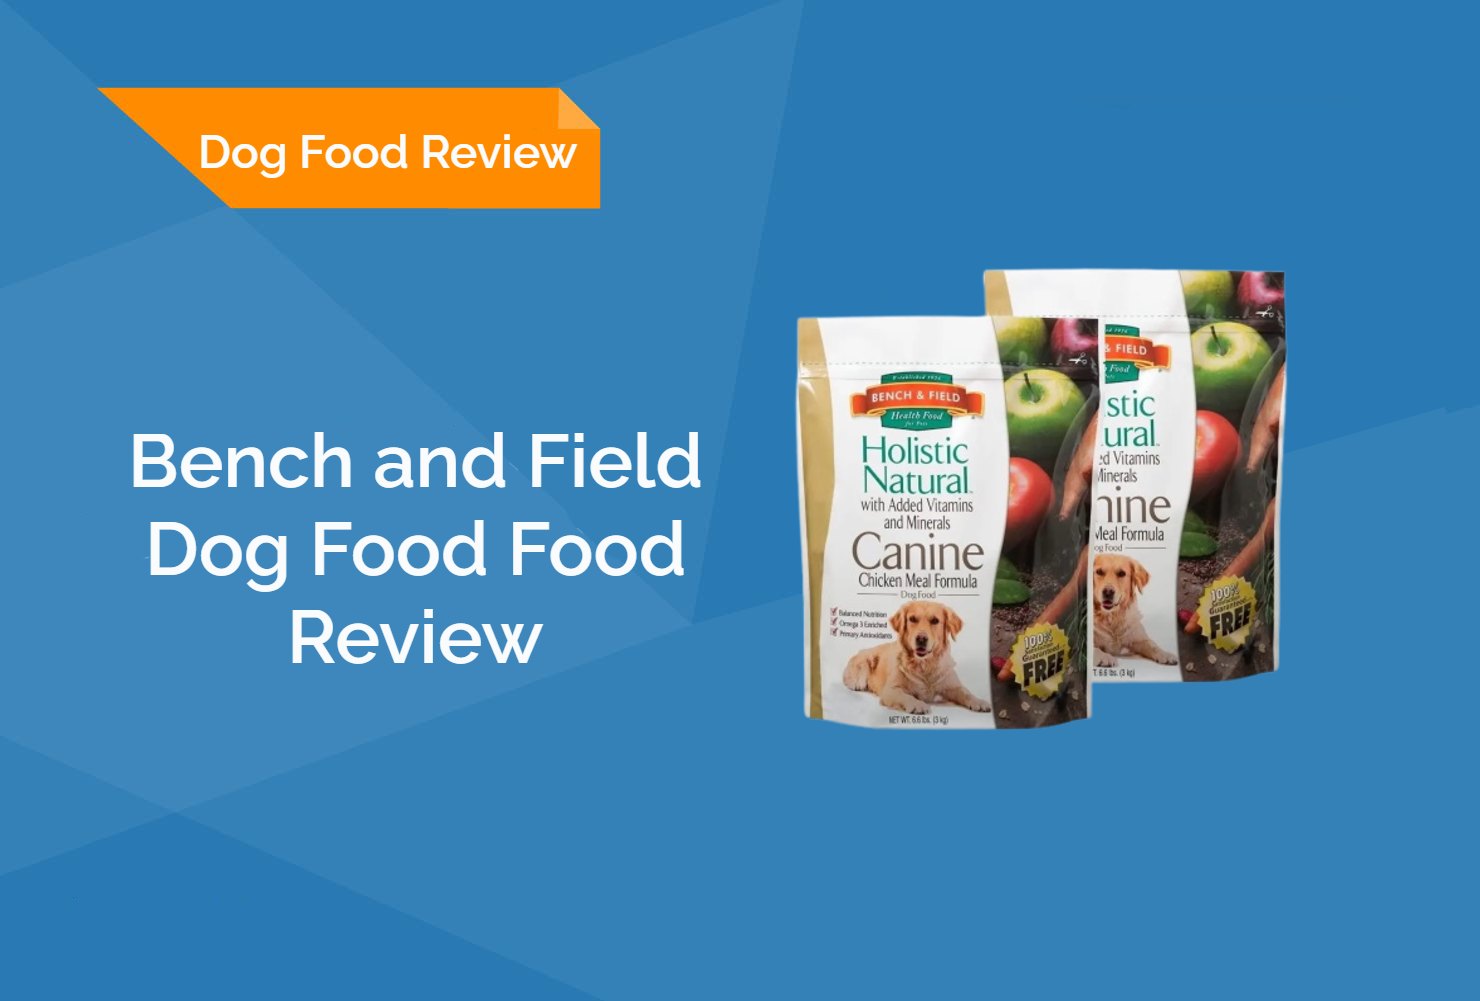 Bench and Field Dog Food Food Review